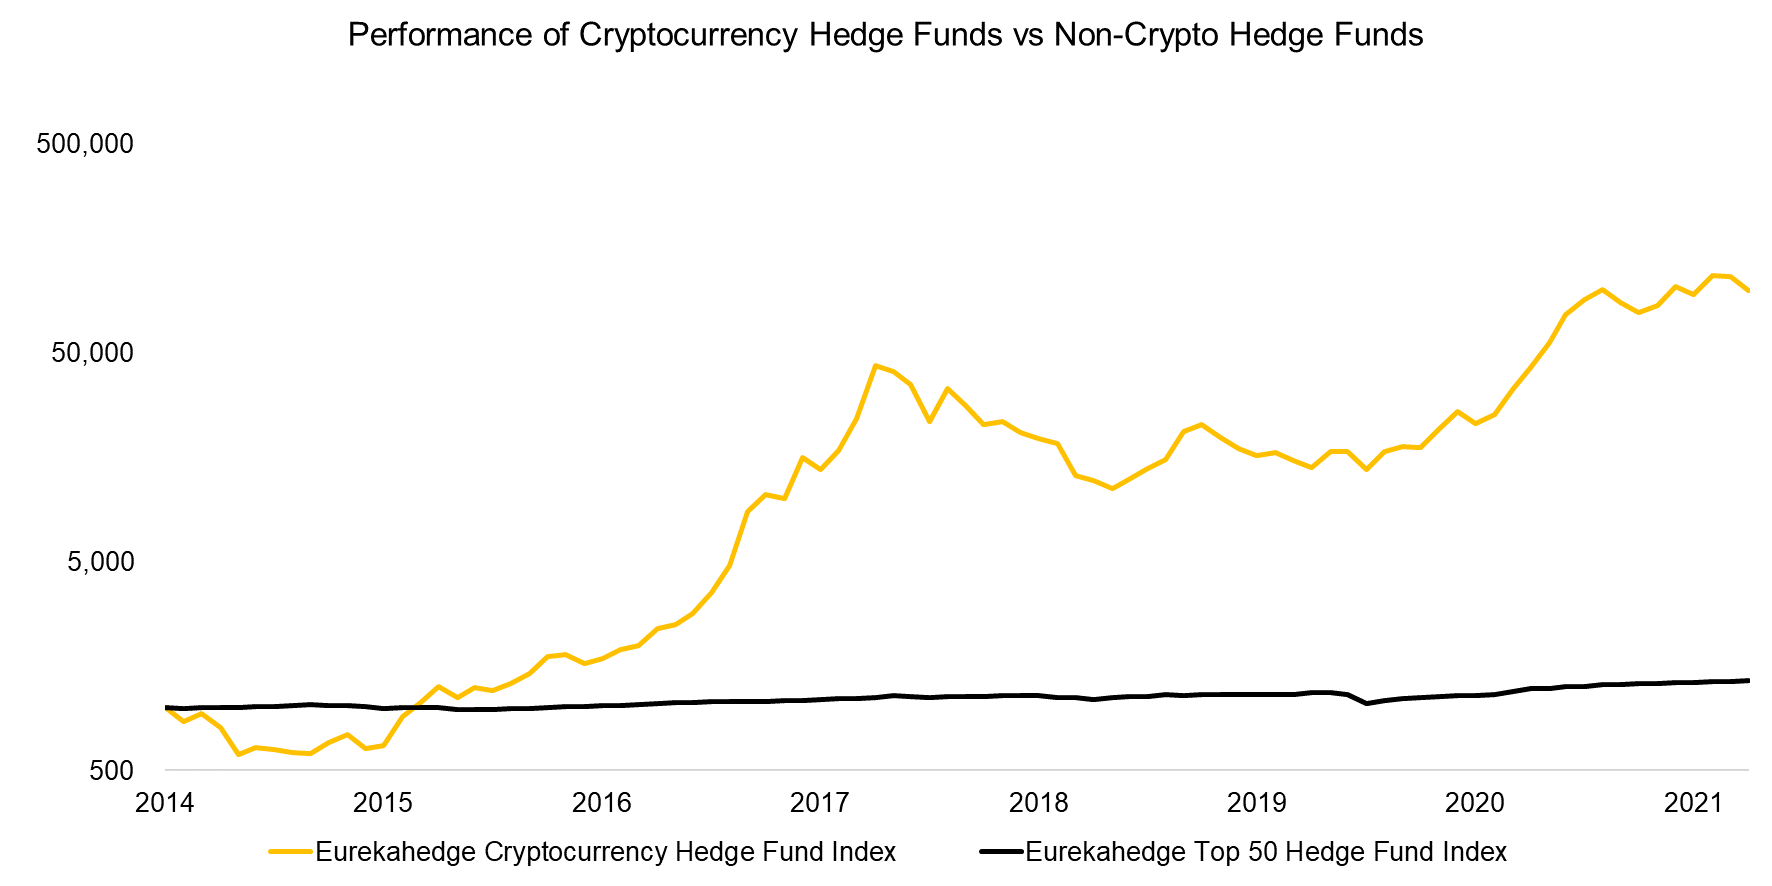 Performance of Cryptocurrency Hedge Funds vs Non-Crypto Hedge Funds